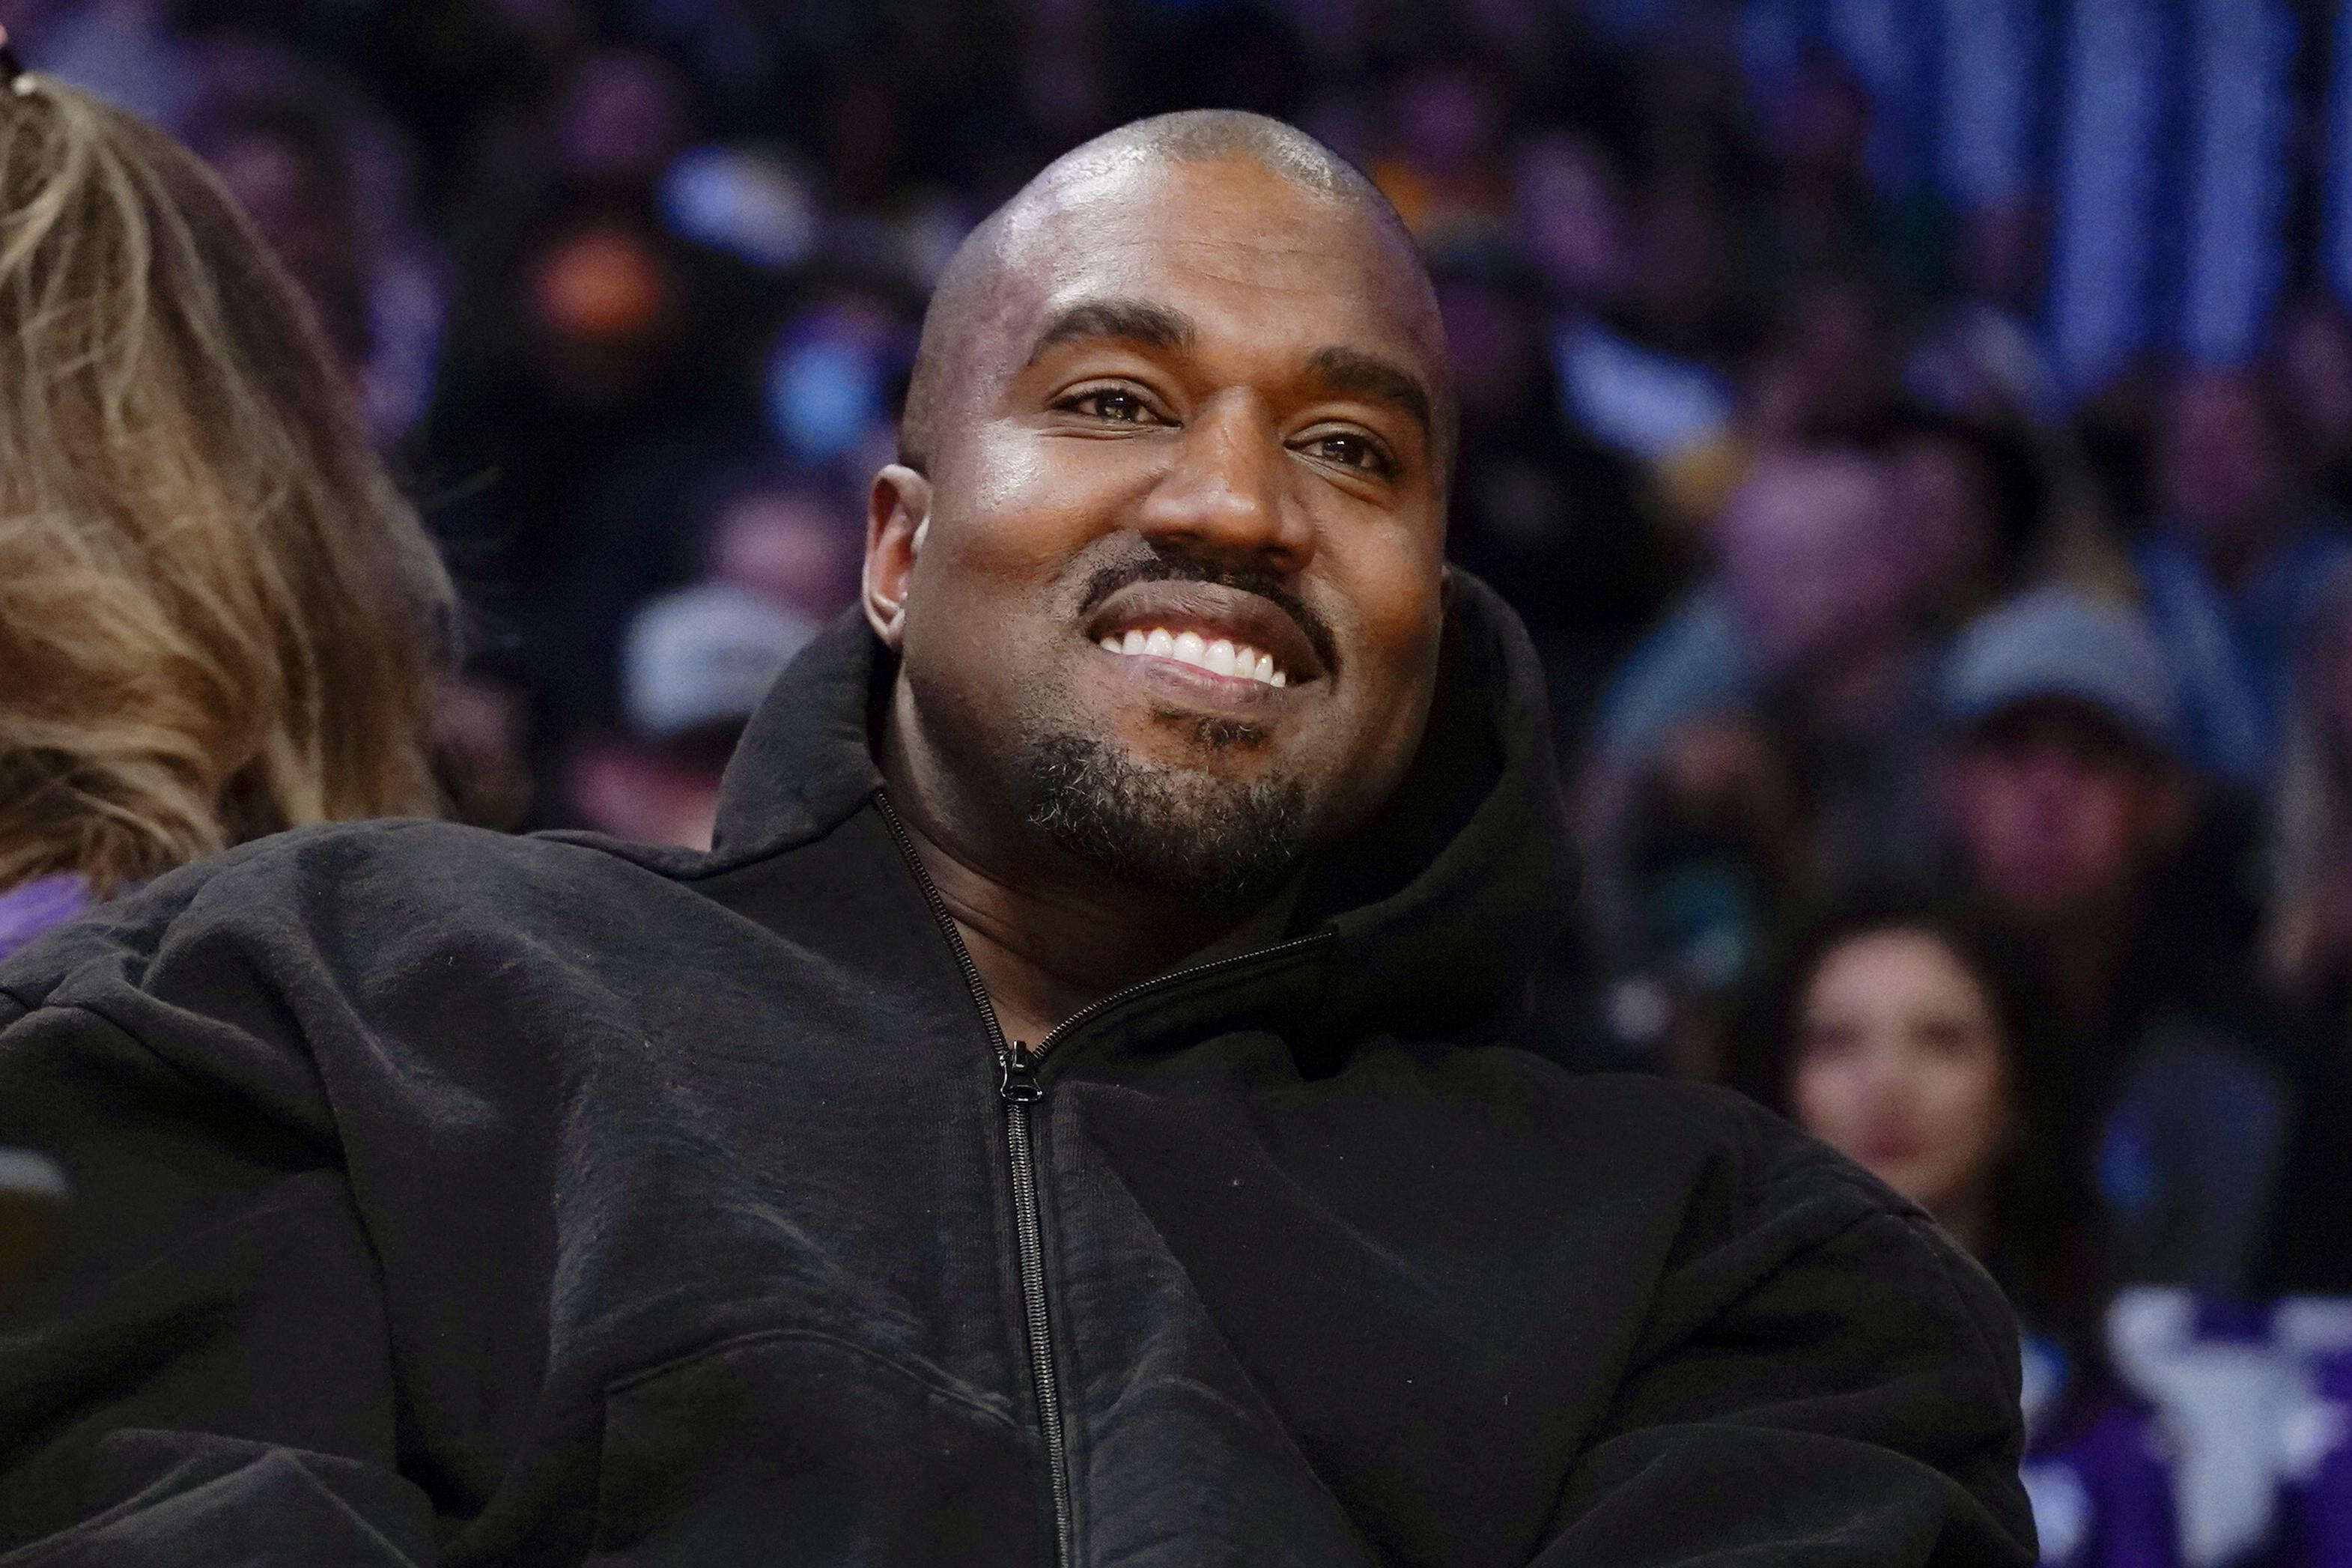 Adidas Officially Cut Ties With Ye After Kanye West Antisemitic Remarks